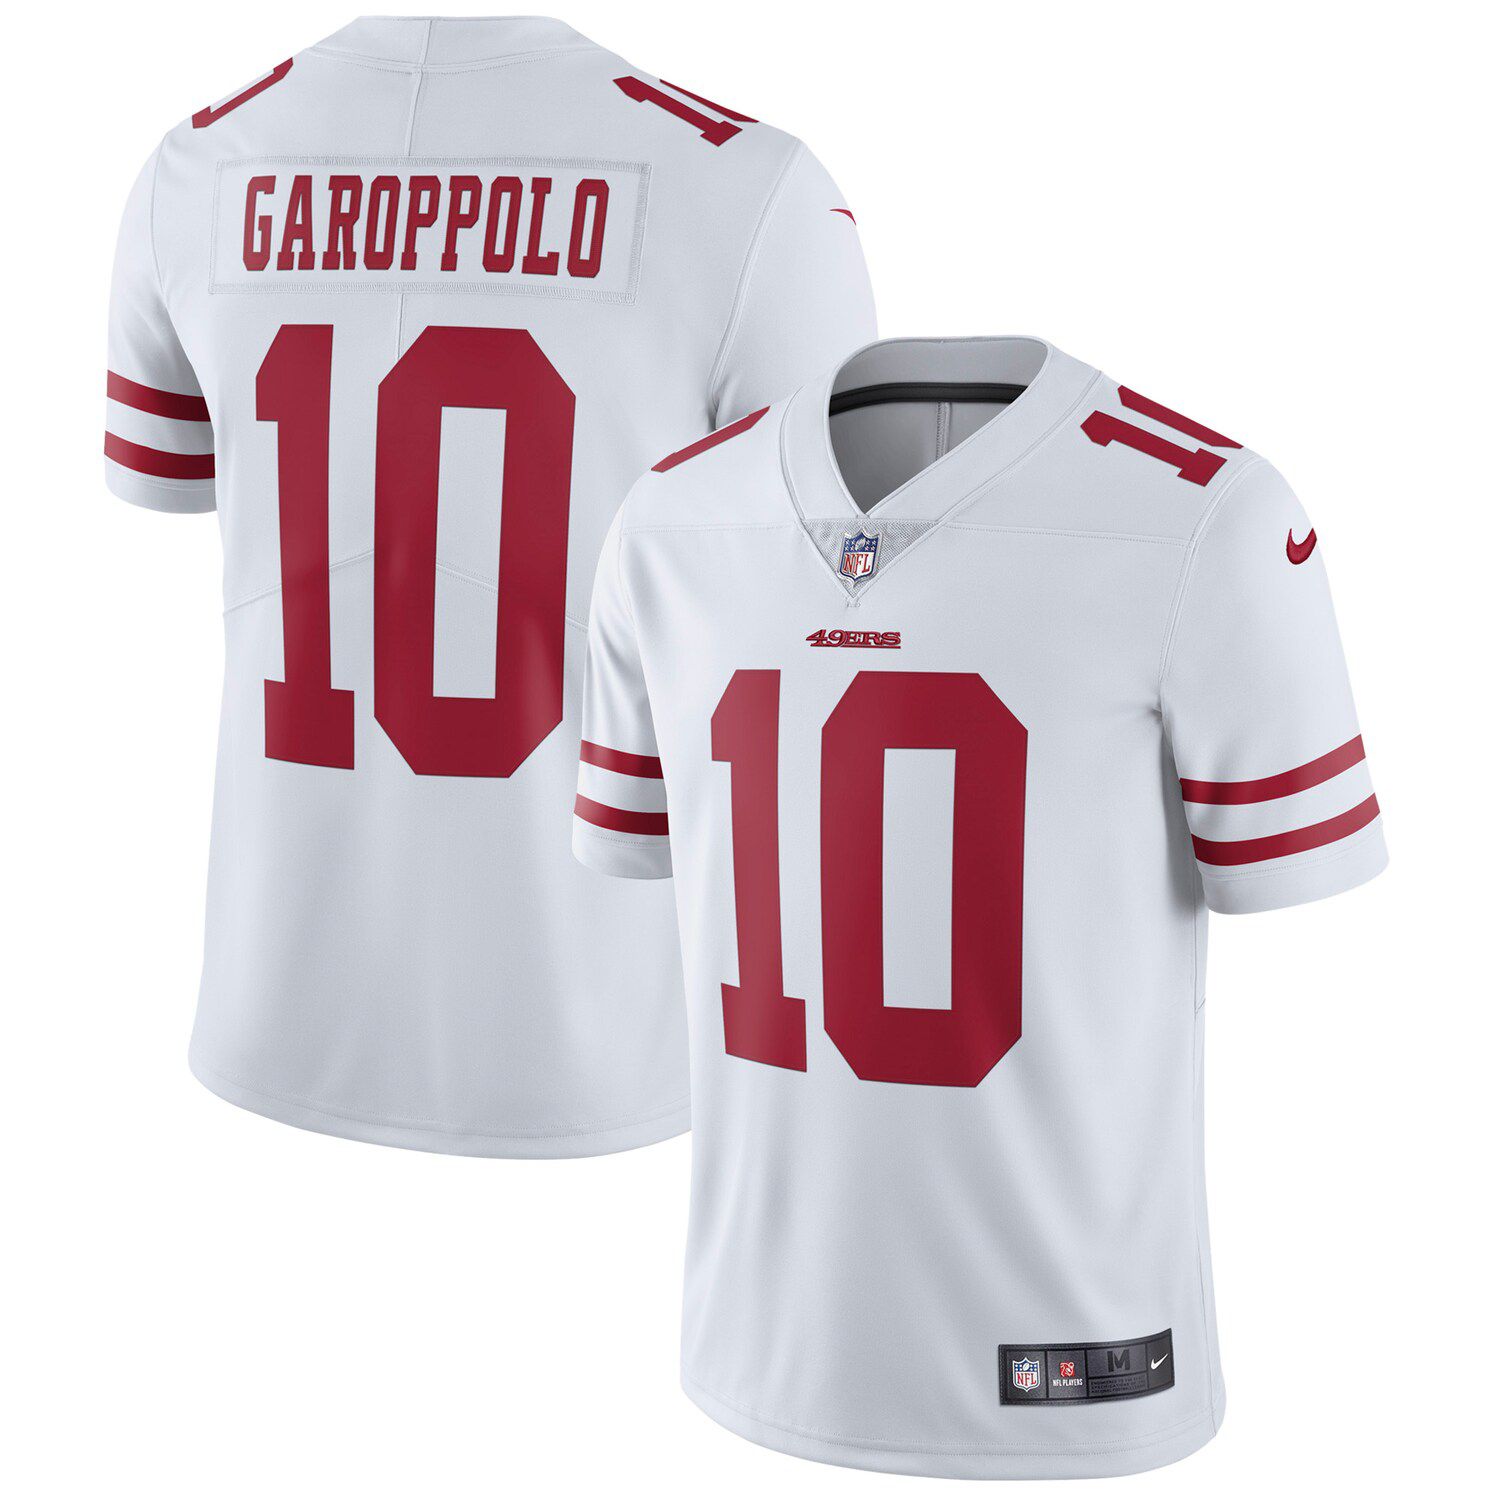 49ers nike limited jersey